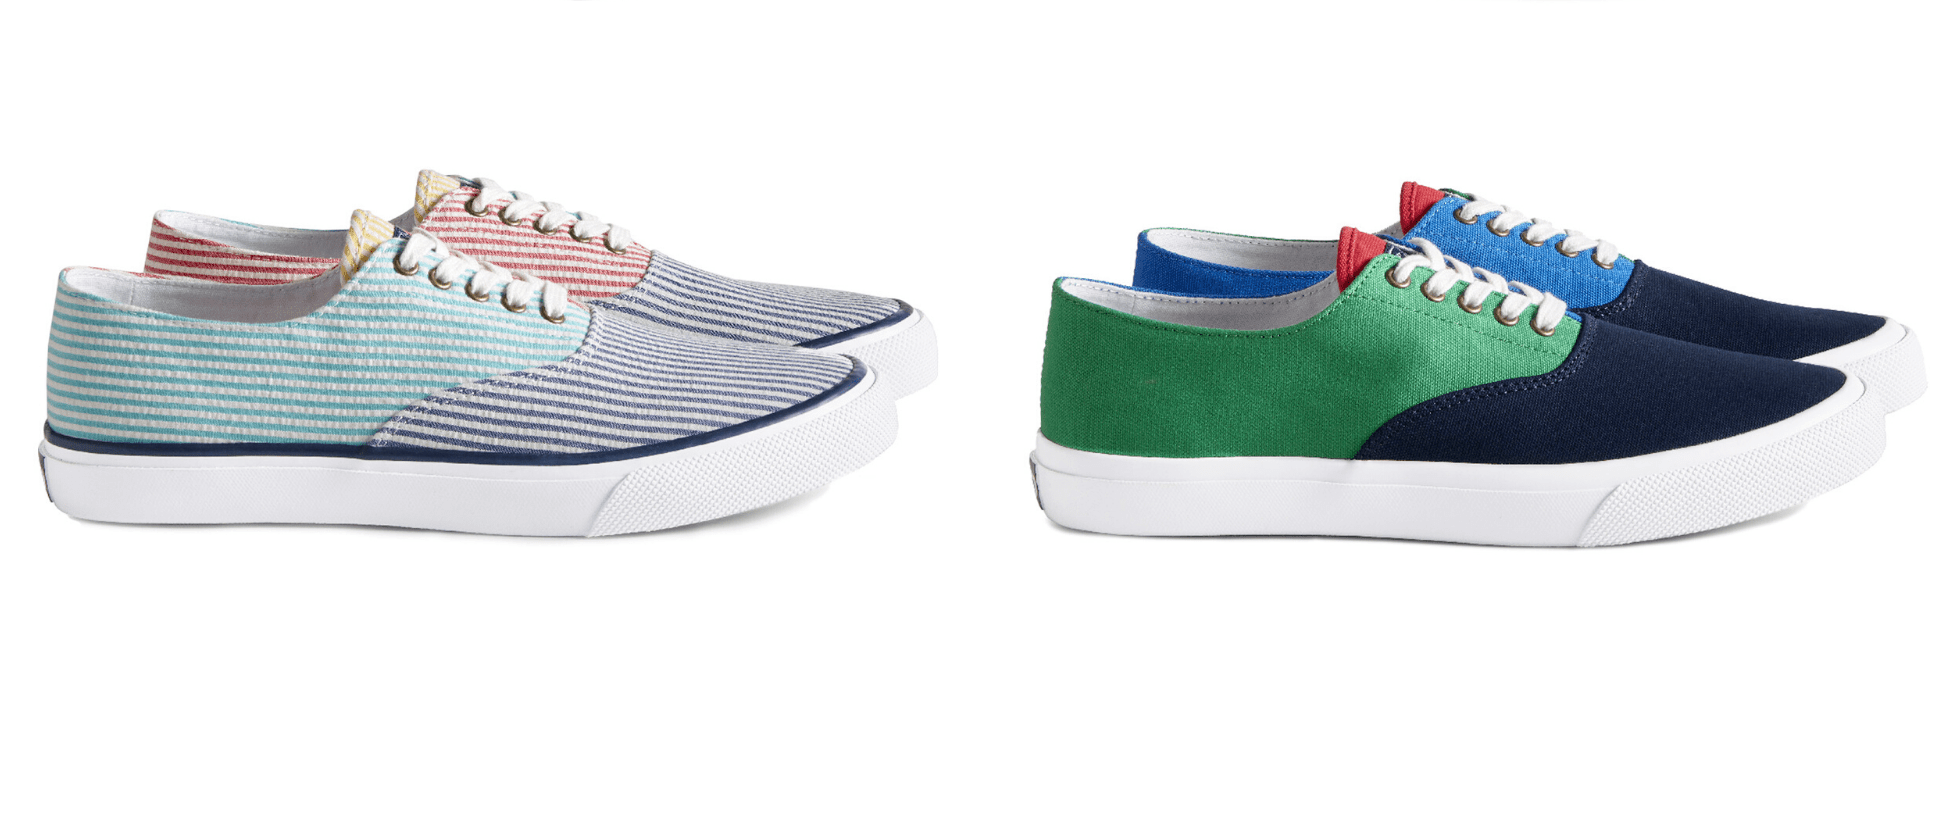 Rowing Blazers x Sperry Top-Sider (Featuring a limited edition Croquet Stripe Seersucker A/O Boat Shoe.)